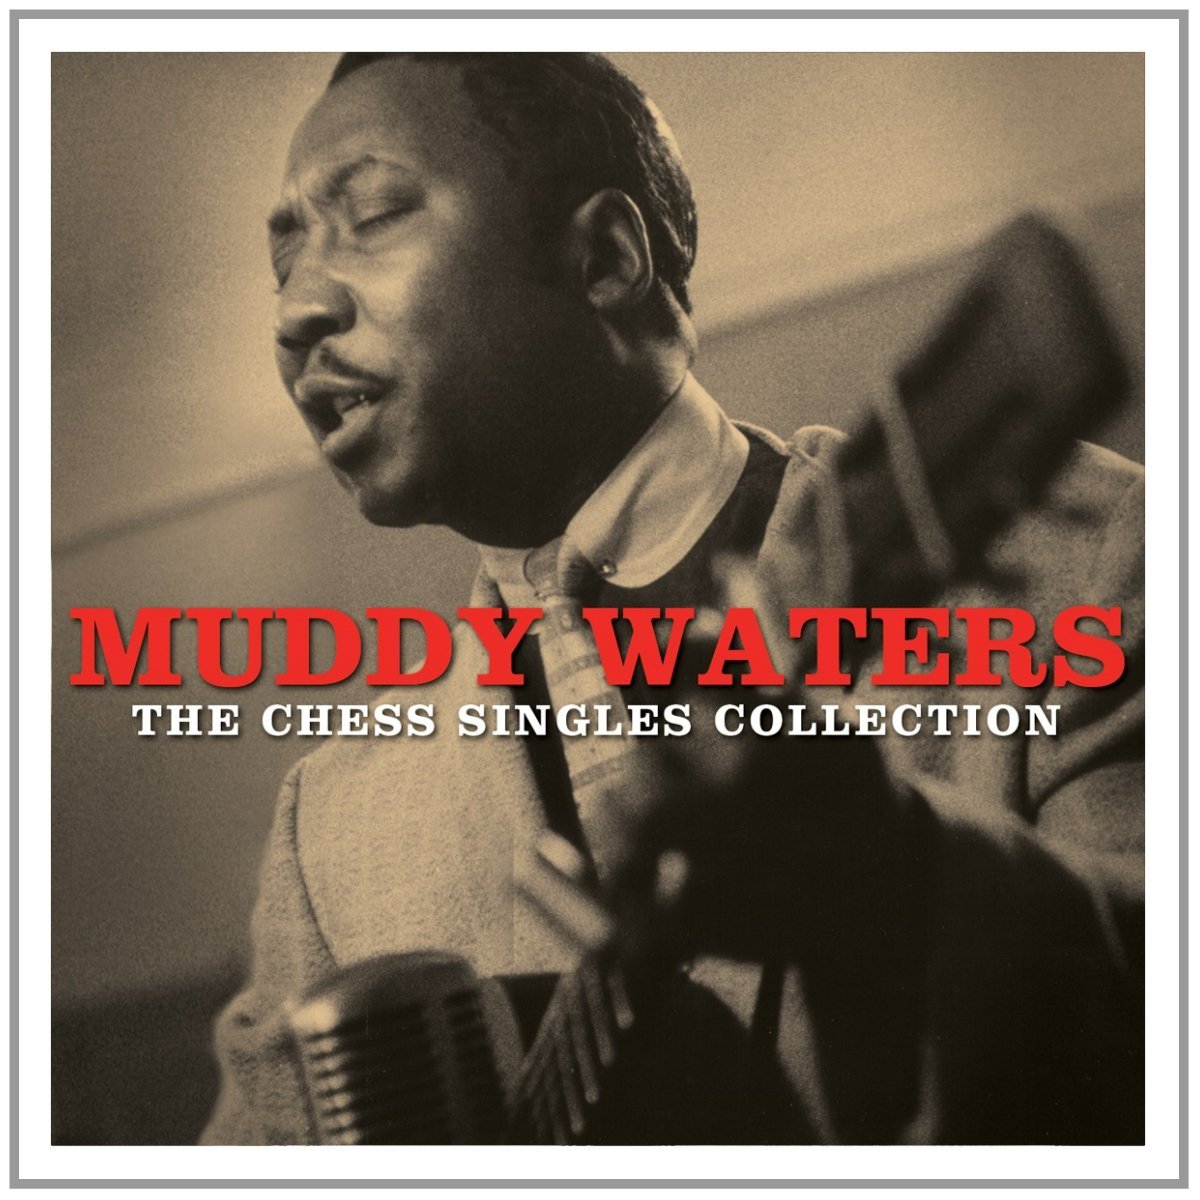 Muddy Waters - The Chess Singles Collection [3CD Box Set] (Music CD)